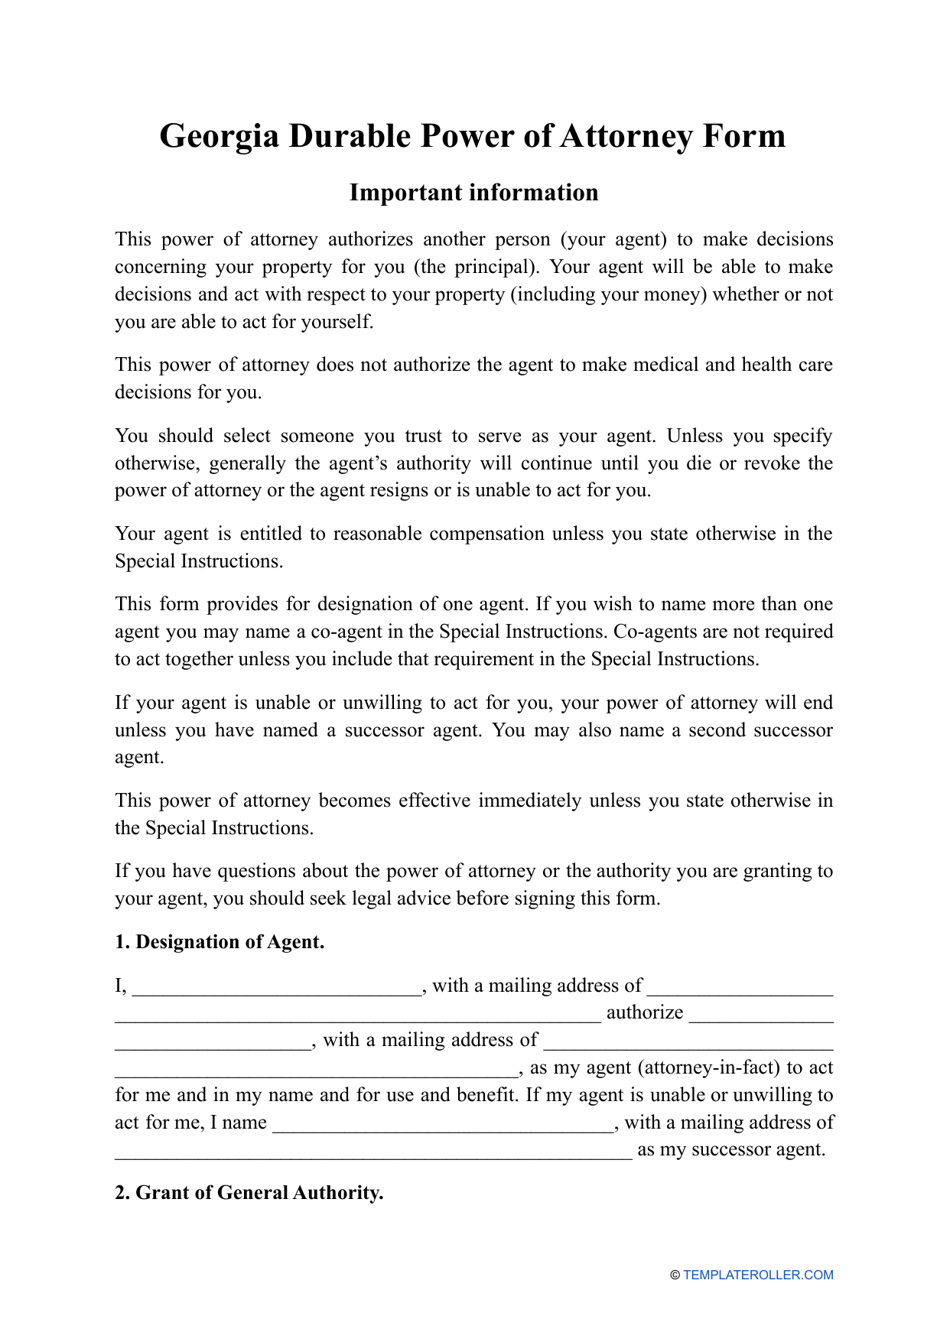 Durable Power of Attorney Form - Georgia (United States), Page 1